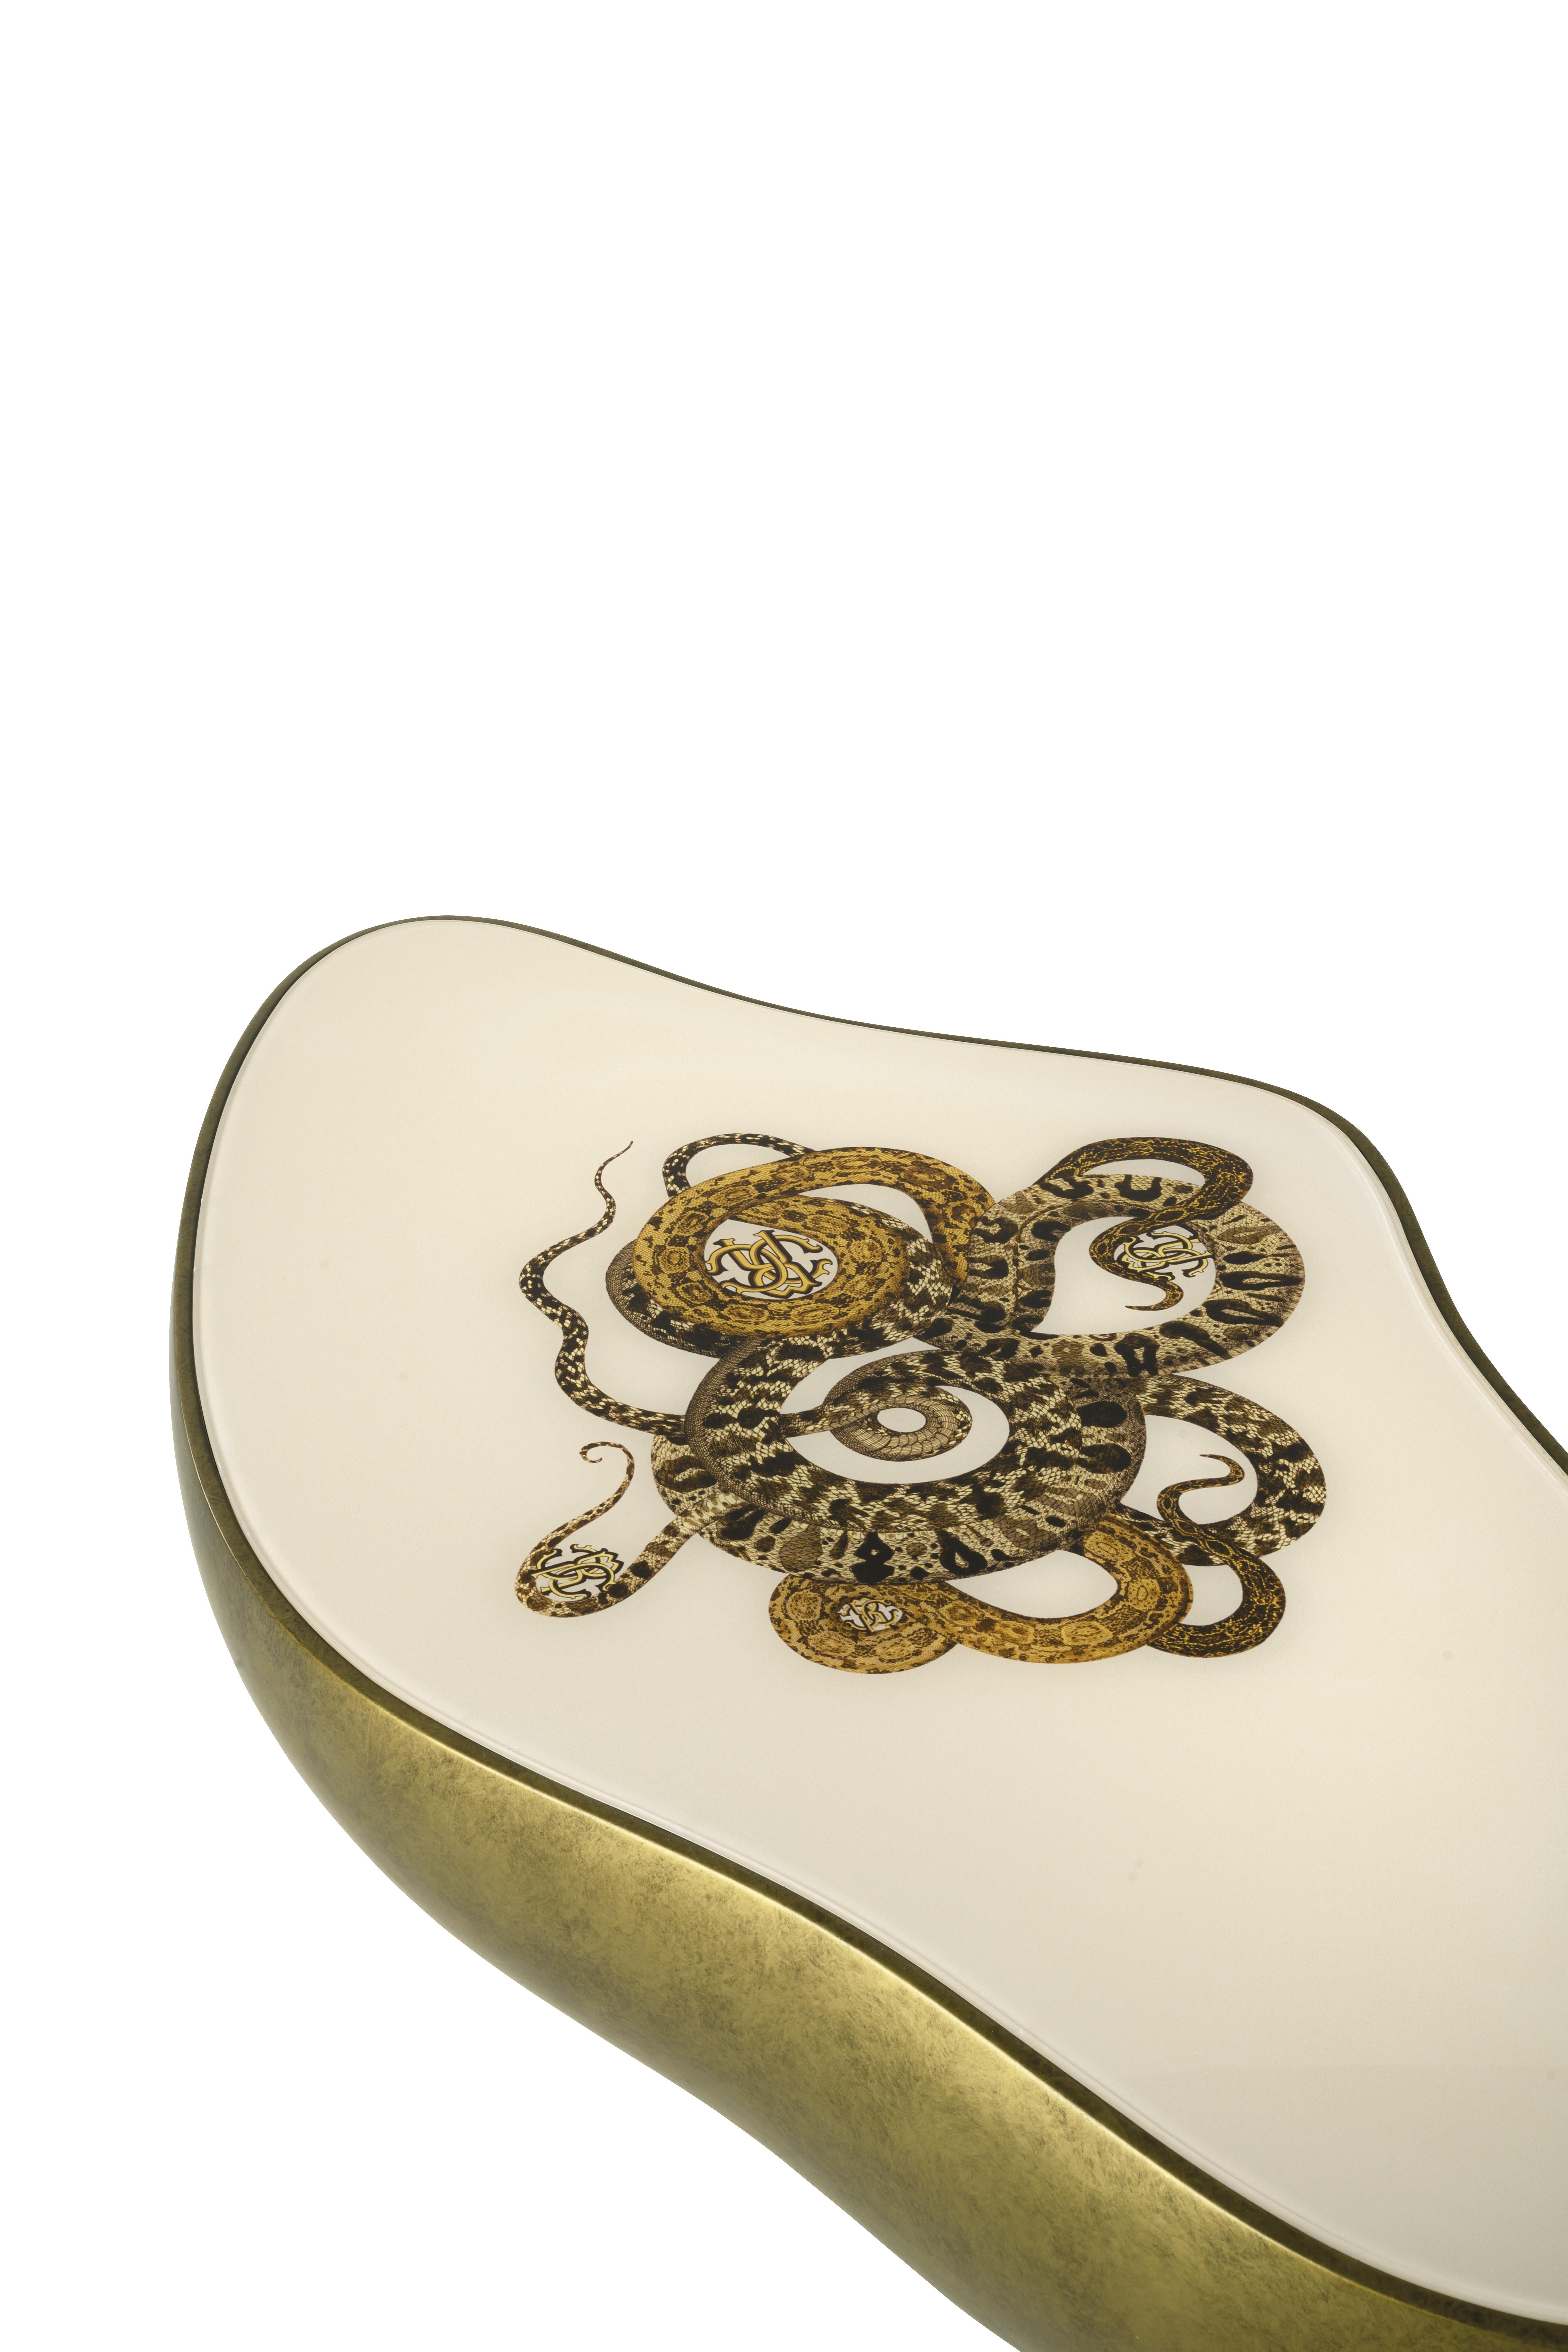 Italian 21st Century, Meru Central Table in Resin by Roberto Cavalli Home Interiors For Sale